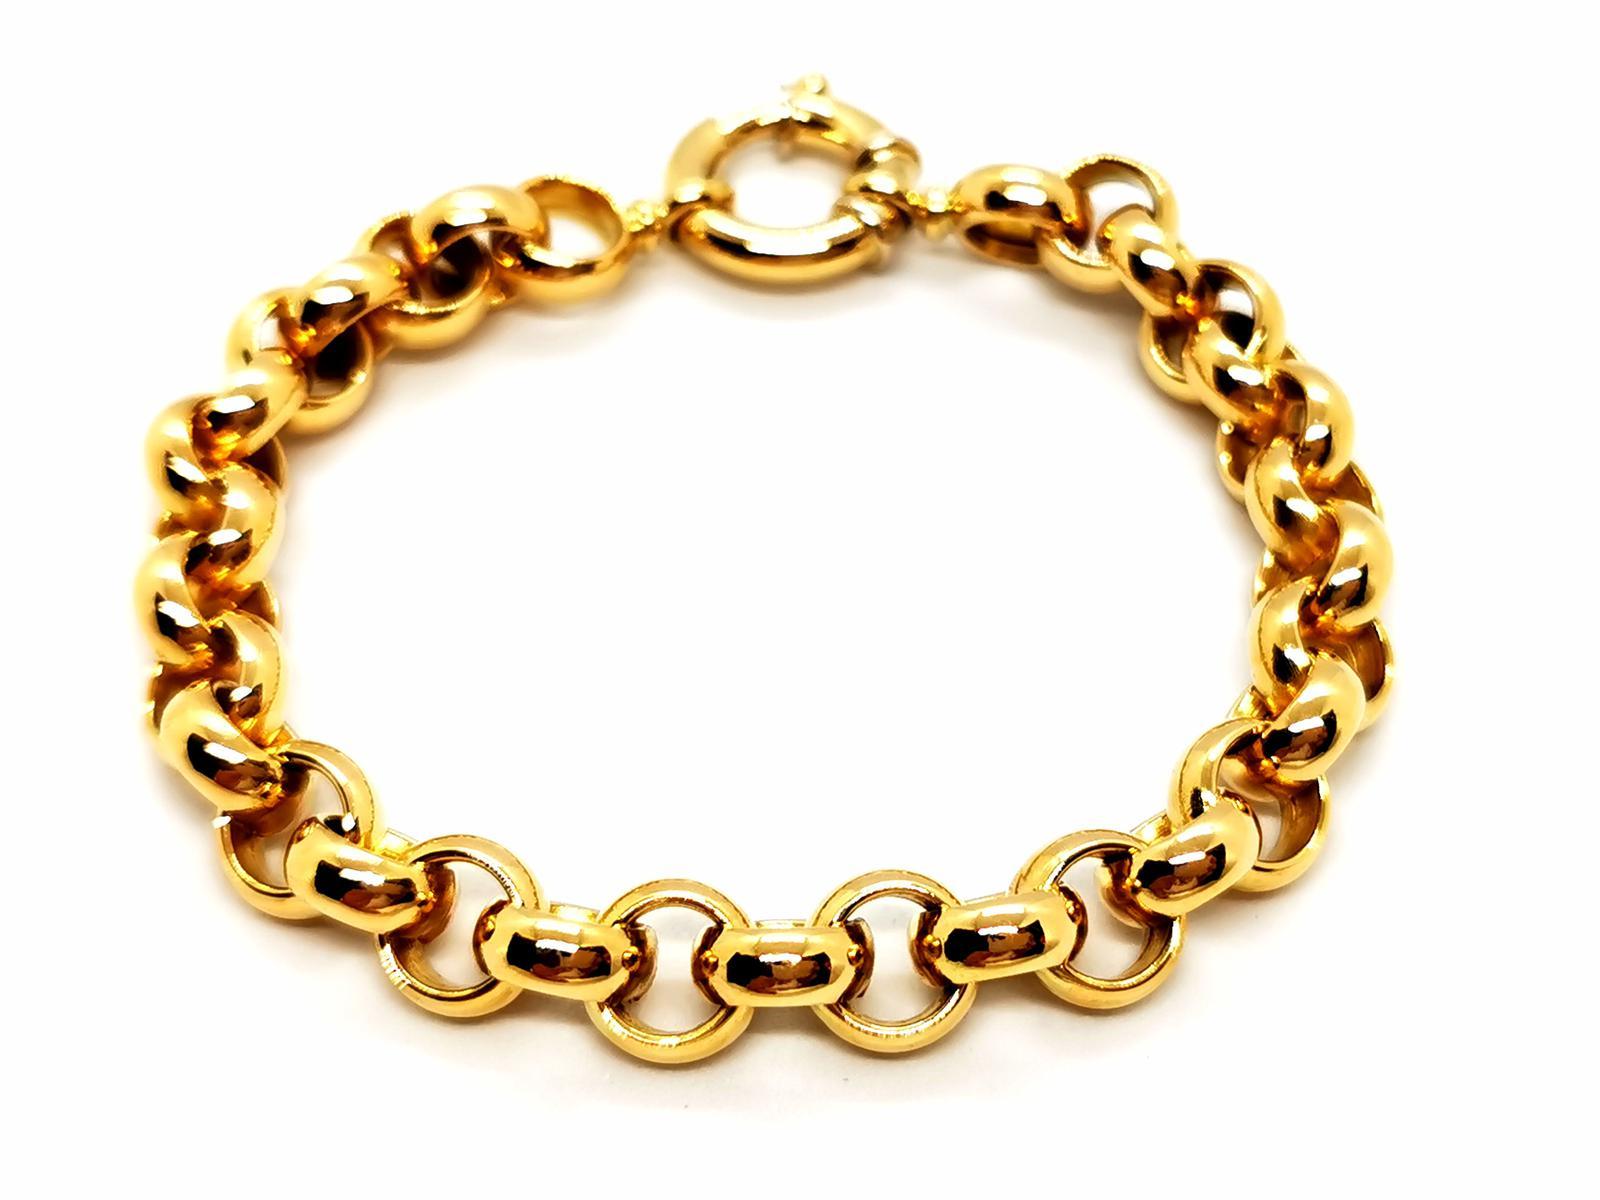 Bracelet in yellow gold 750 thousandths (18 carats). jaseron mesh. length: 19.5 cm. width: 0.87 cm. total weight: 24.08 g. eagle head hallmark. excellent condition
